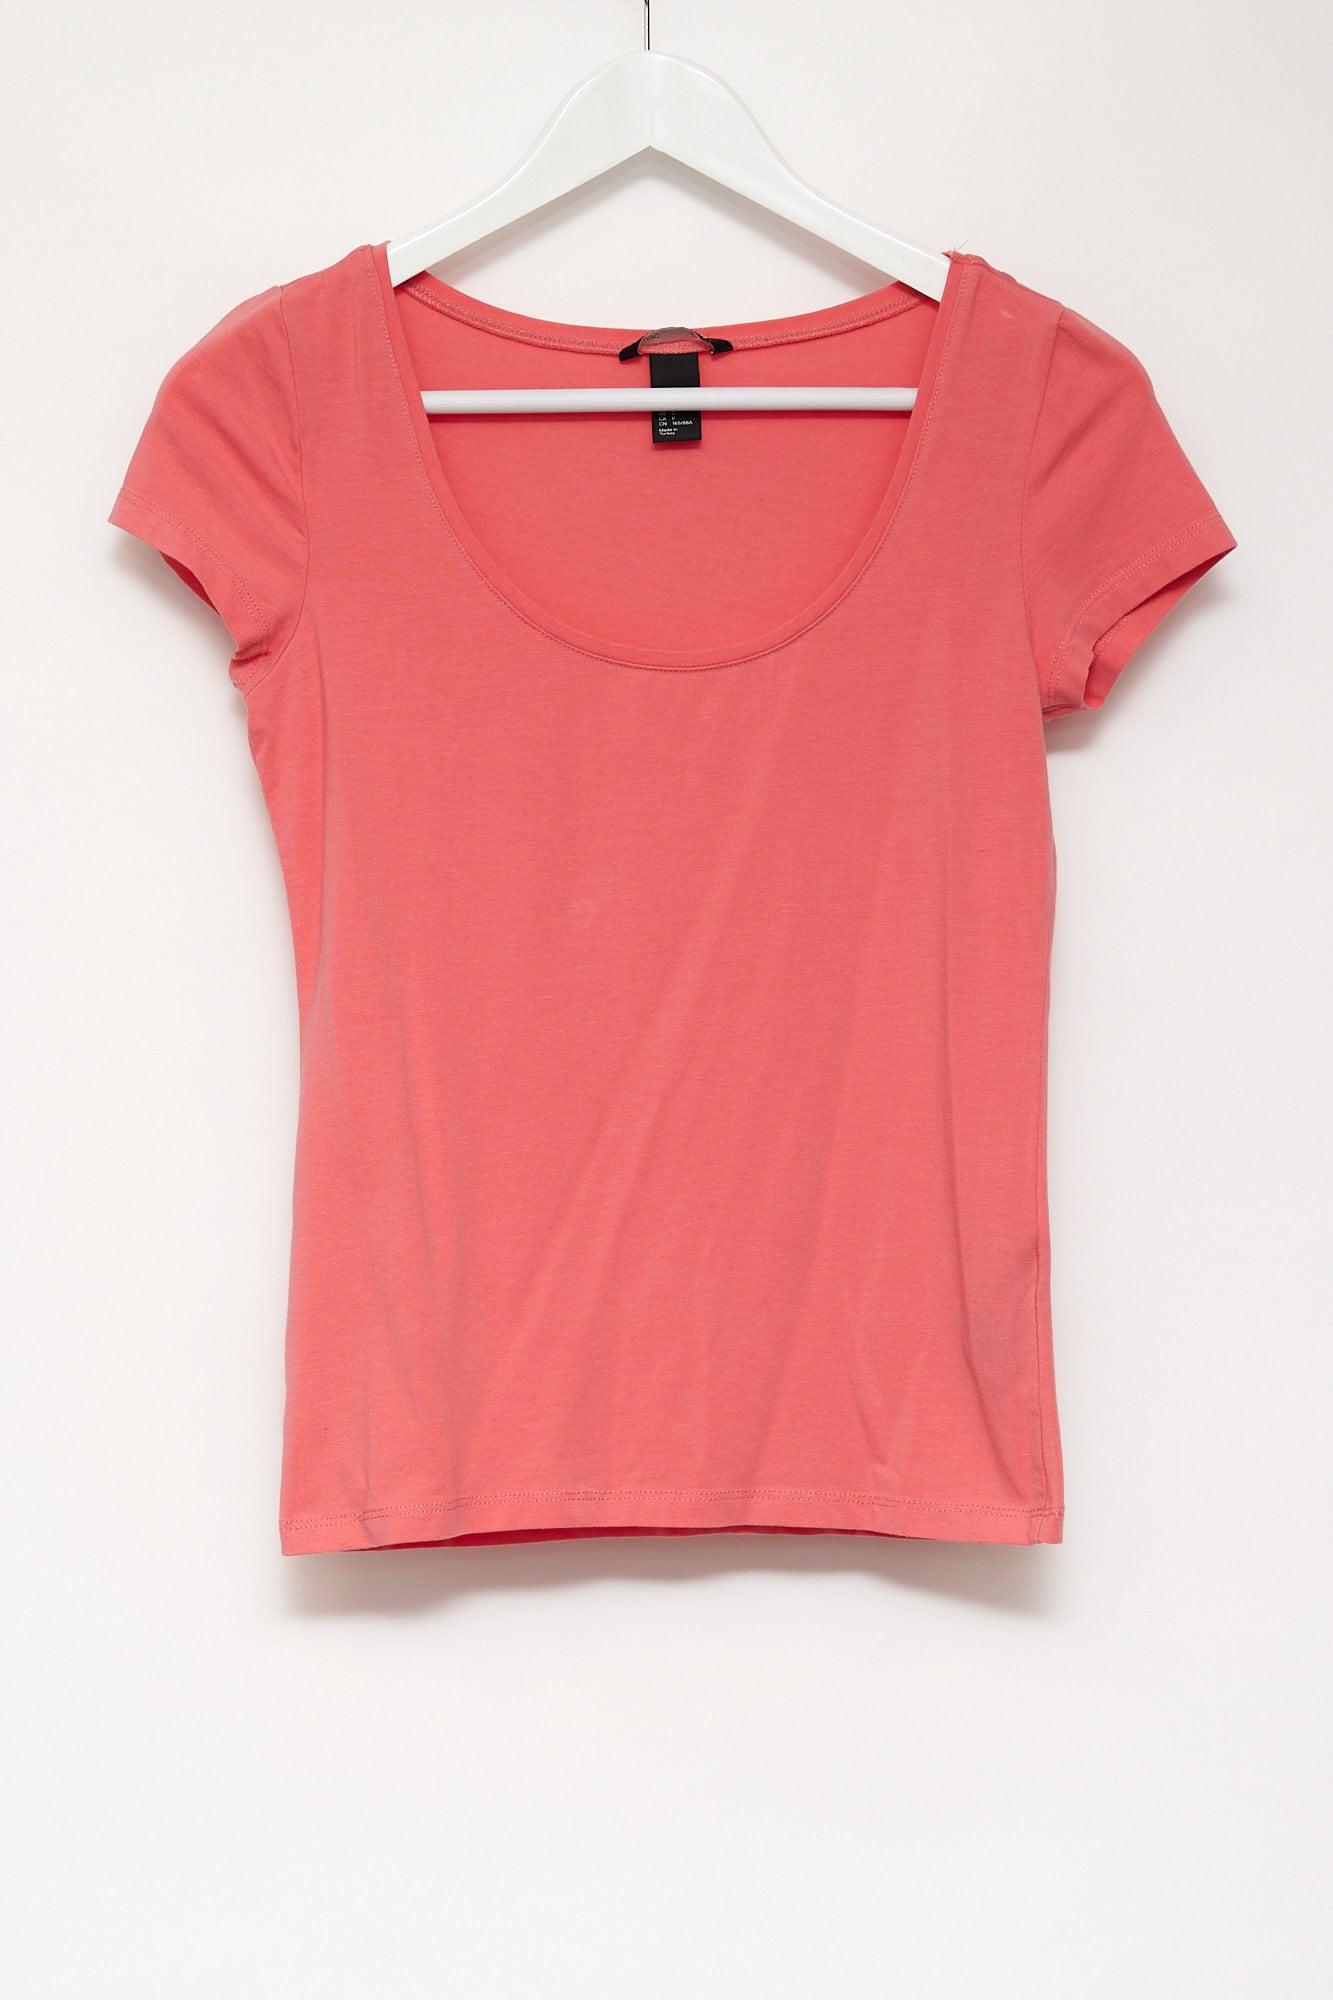 Womens H&M Pink T-shirt size small